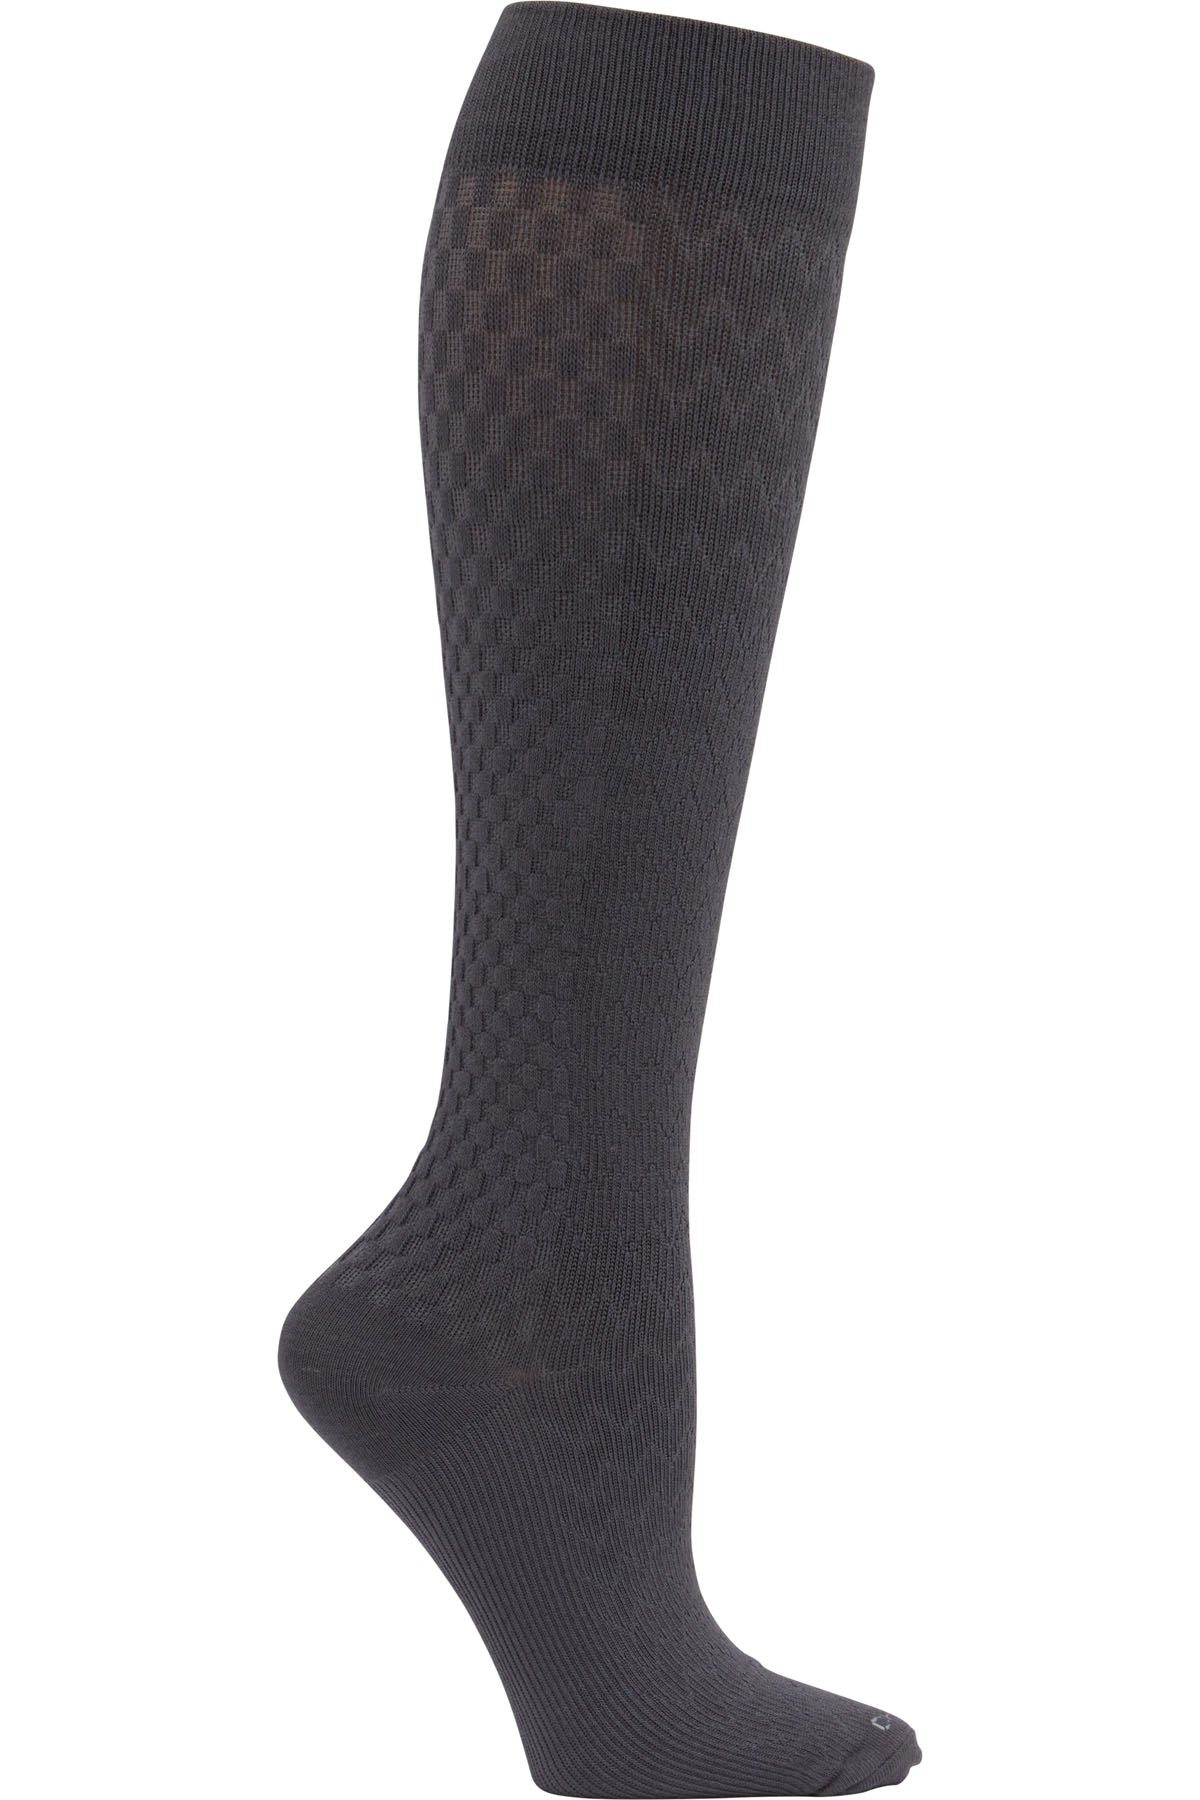 Cherokee Plus Size Mild Compression Extra Wide Calf Socks True Support 10-15 mmHg in Graphite at Parker's Clothing and Shoes.